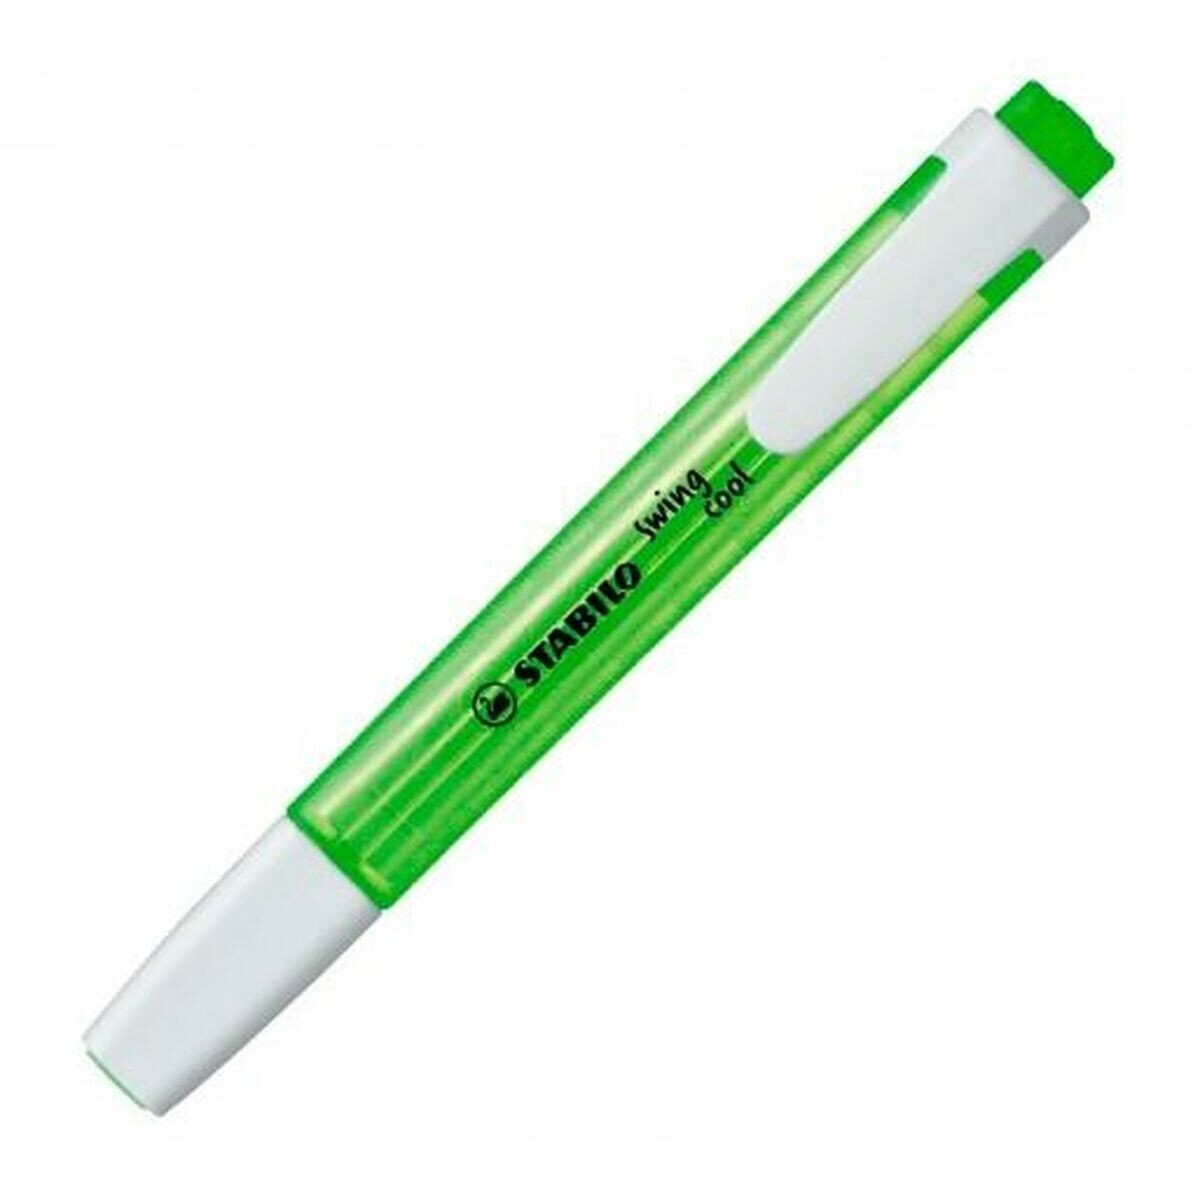 Highlighter Stabilo Swing Cool Green 10 Pieces